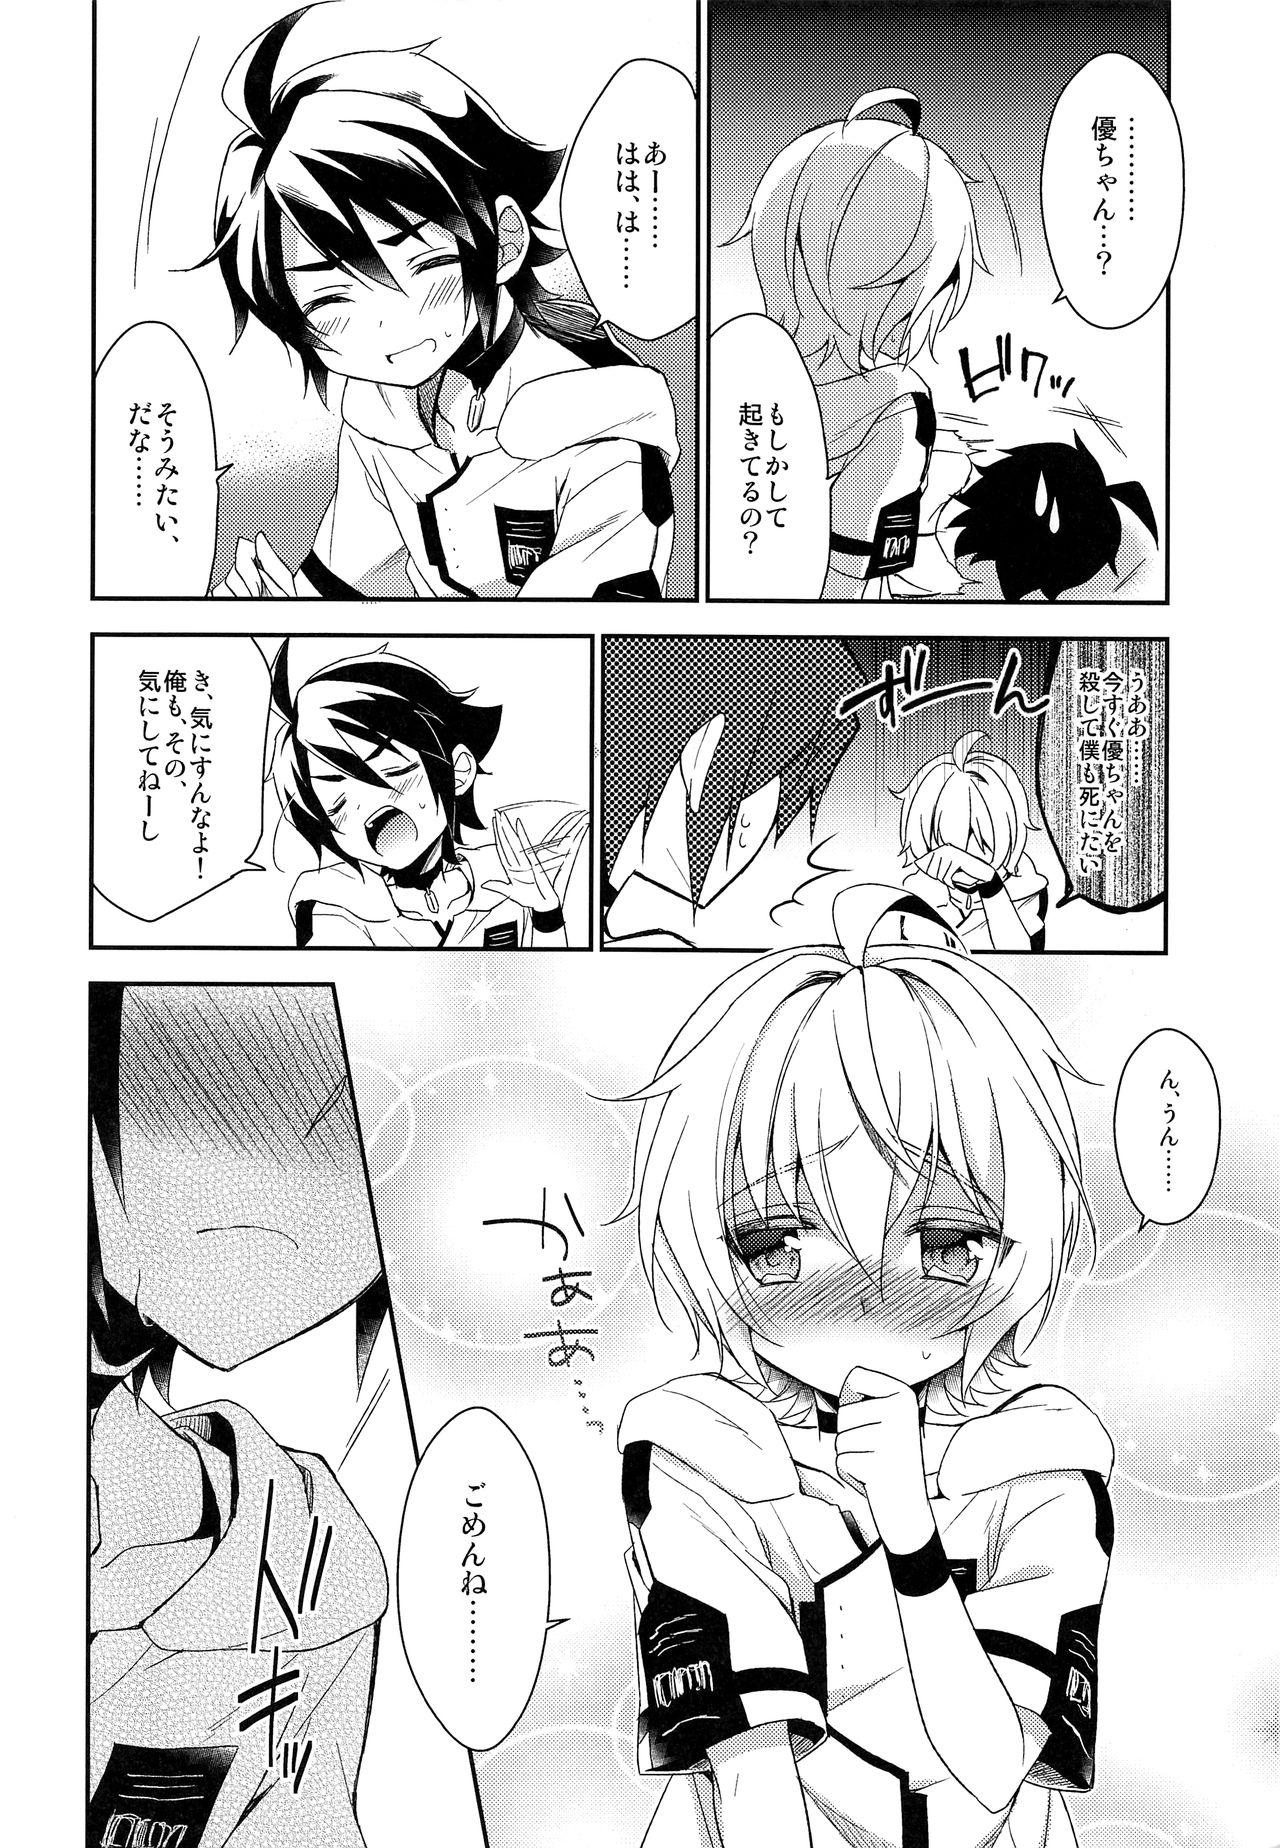 Party Tenshi no Tawamure - Seraph of the end Underwear - Page 5